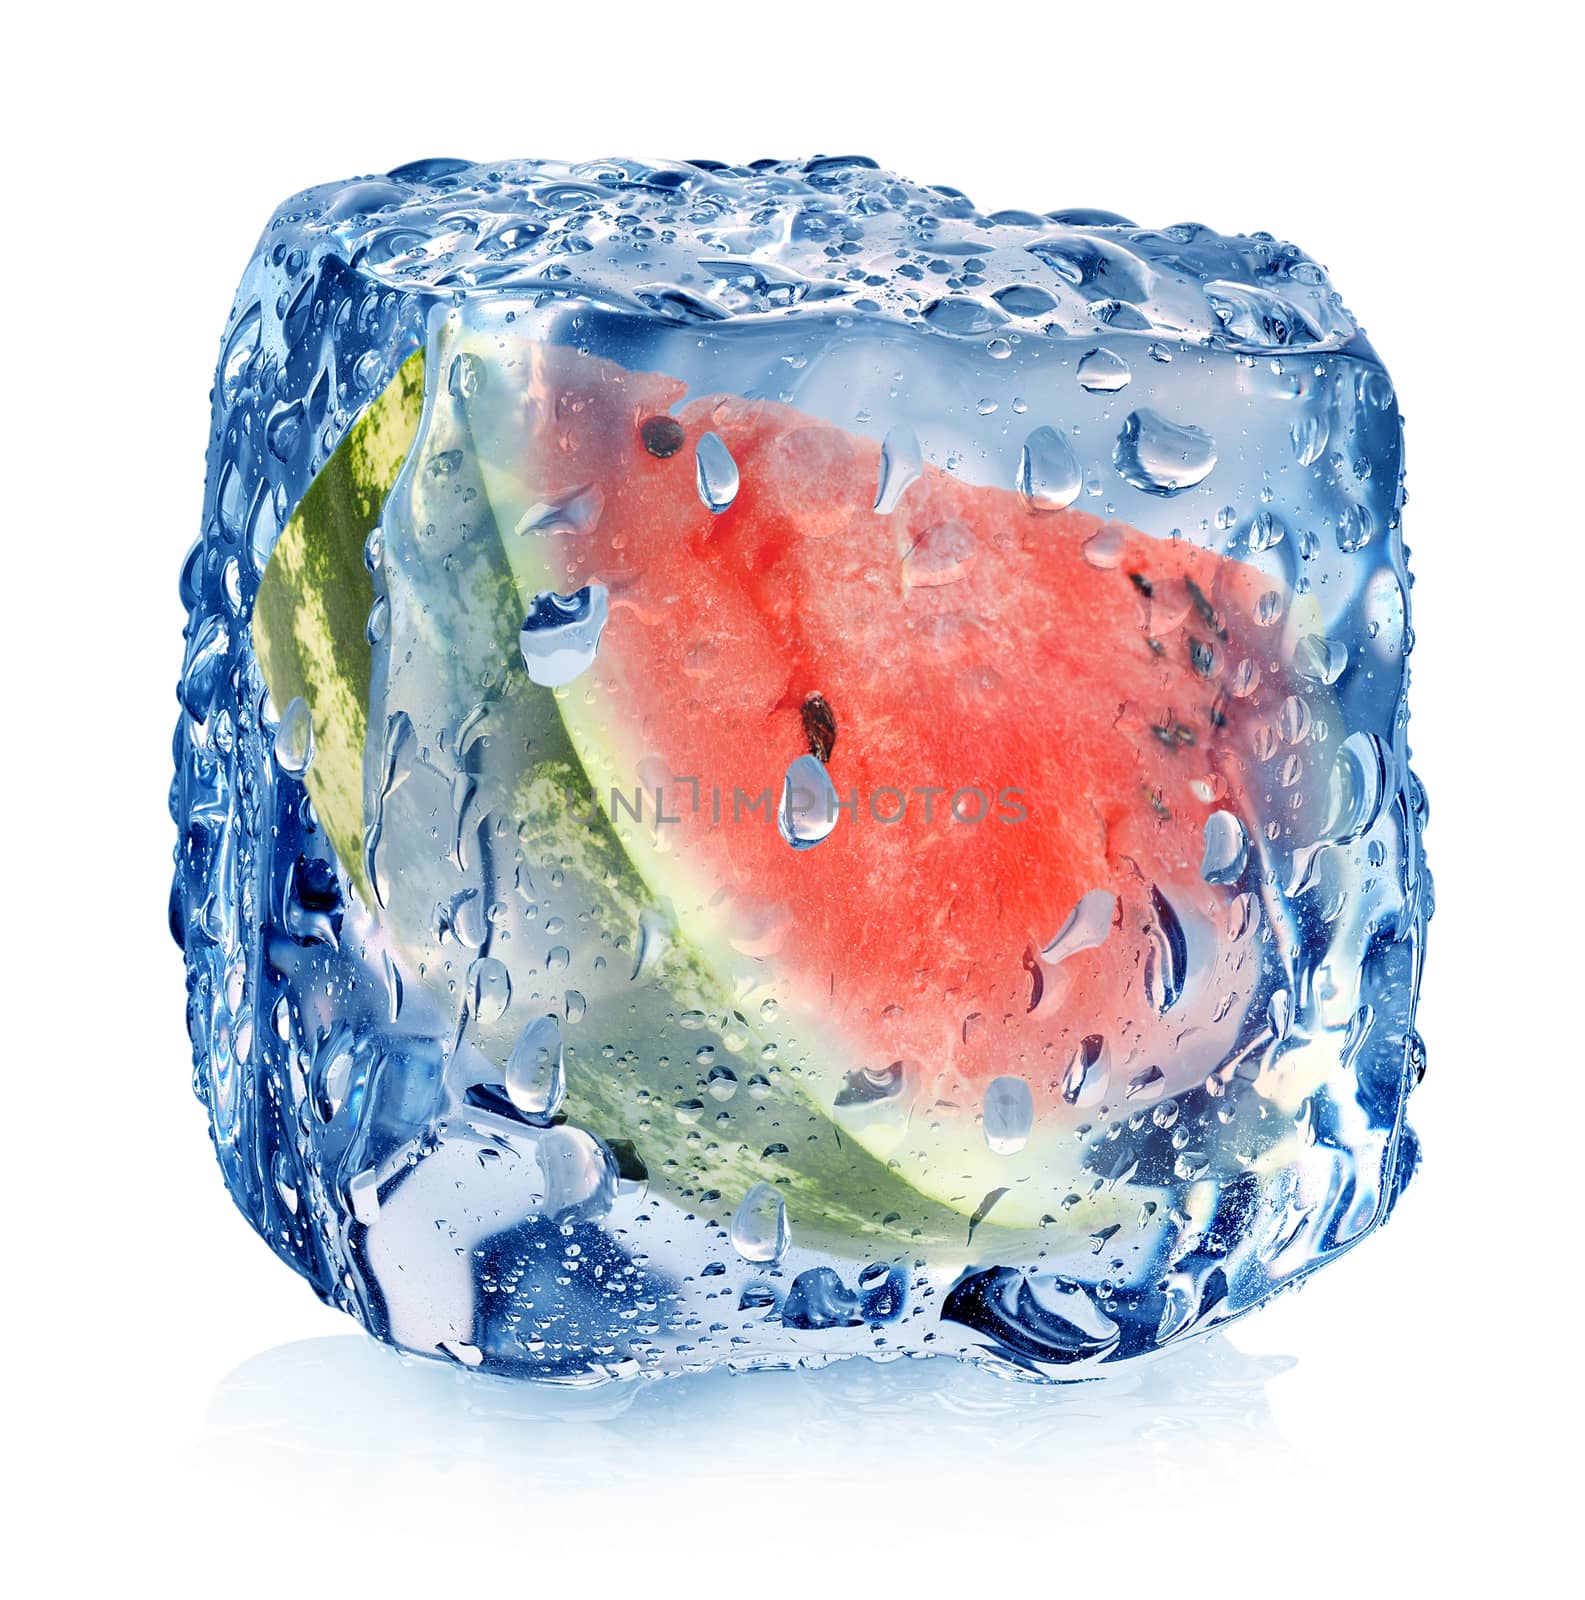 Watermelon in ice cube by Givaga